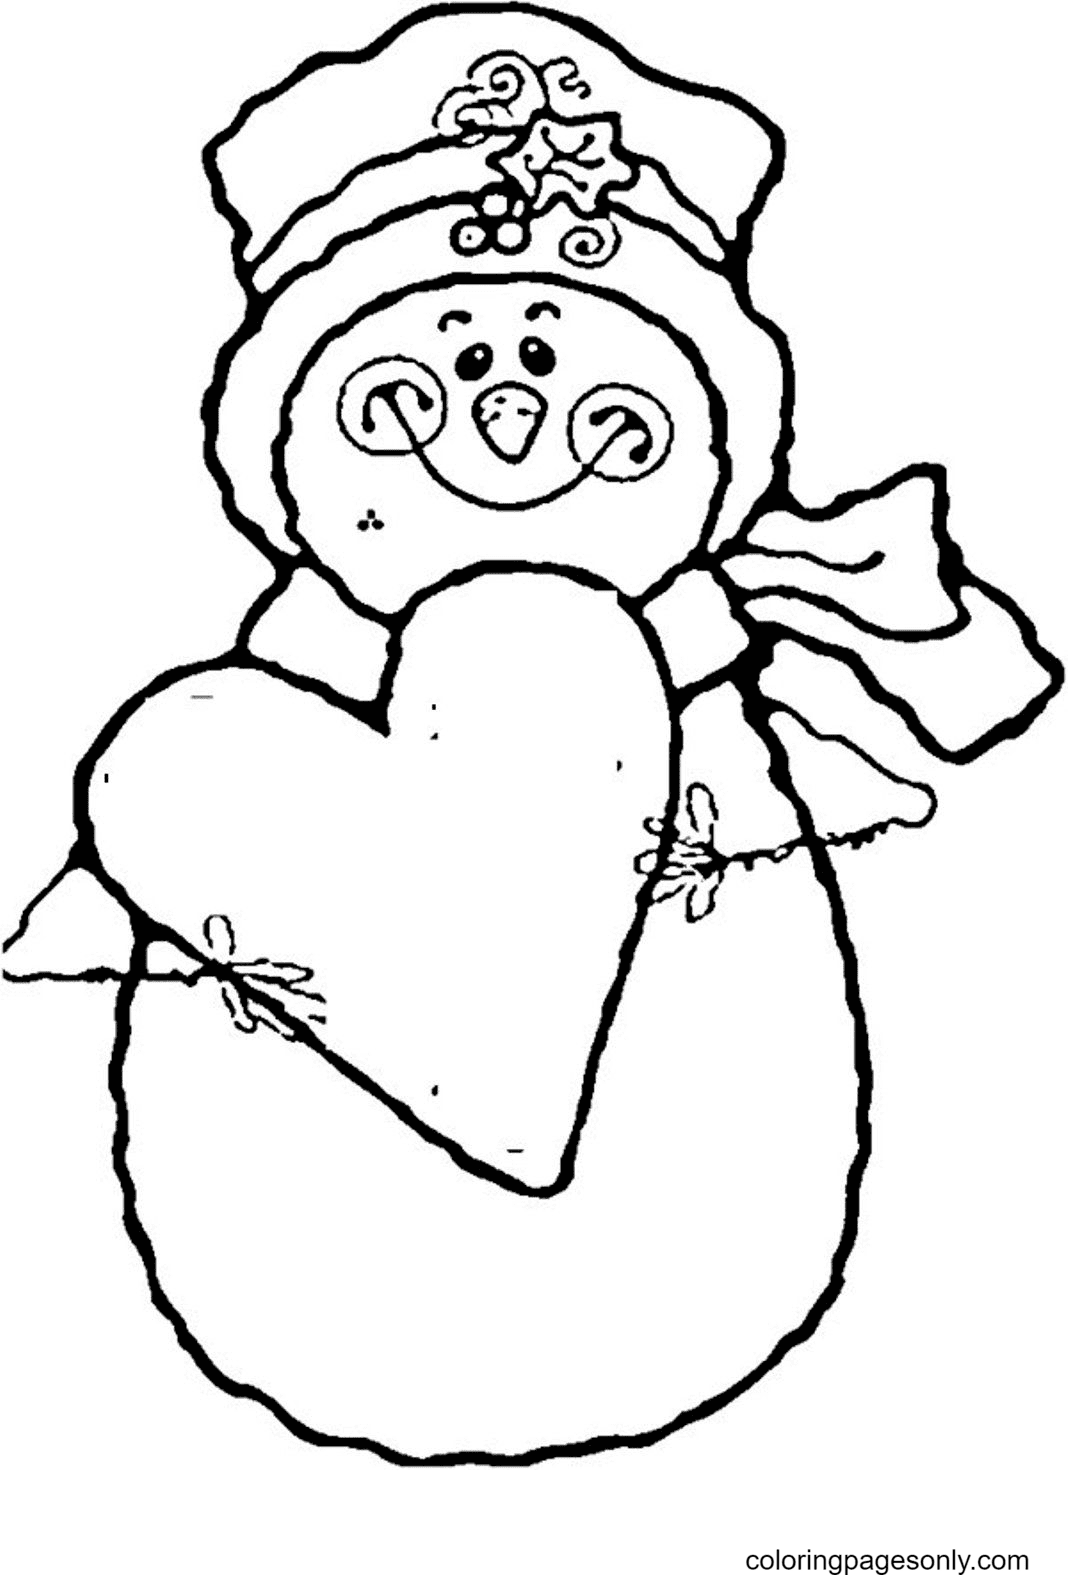 Snowman Holding a Heart Coloring Pages